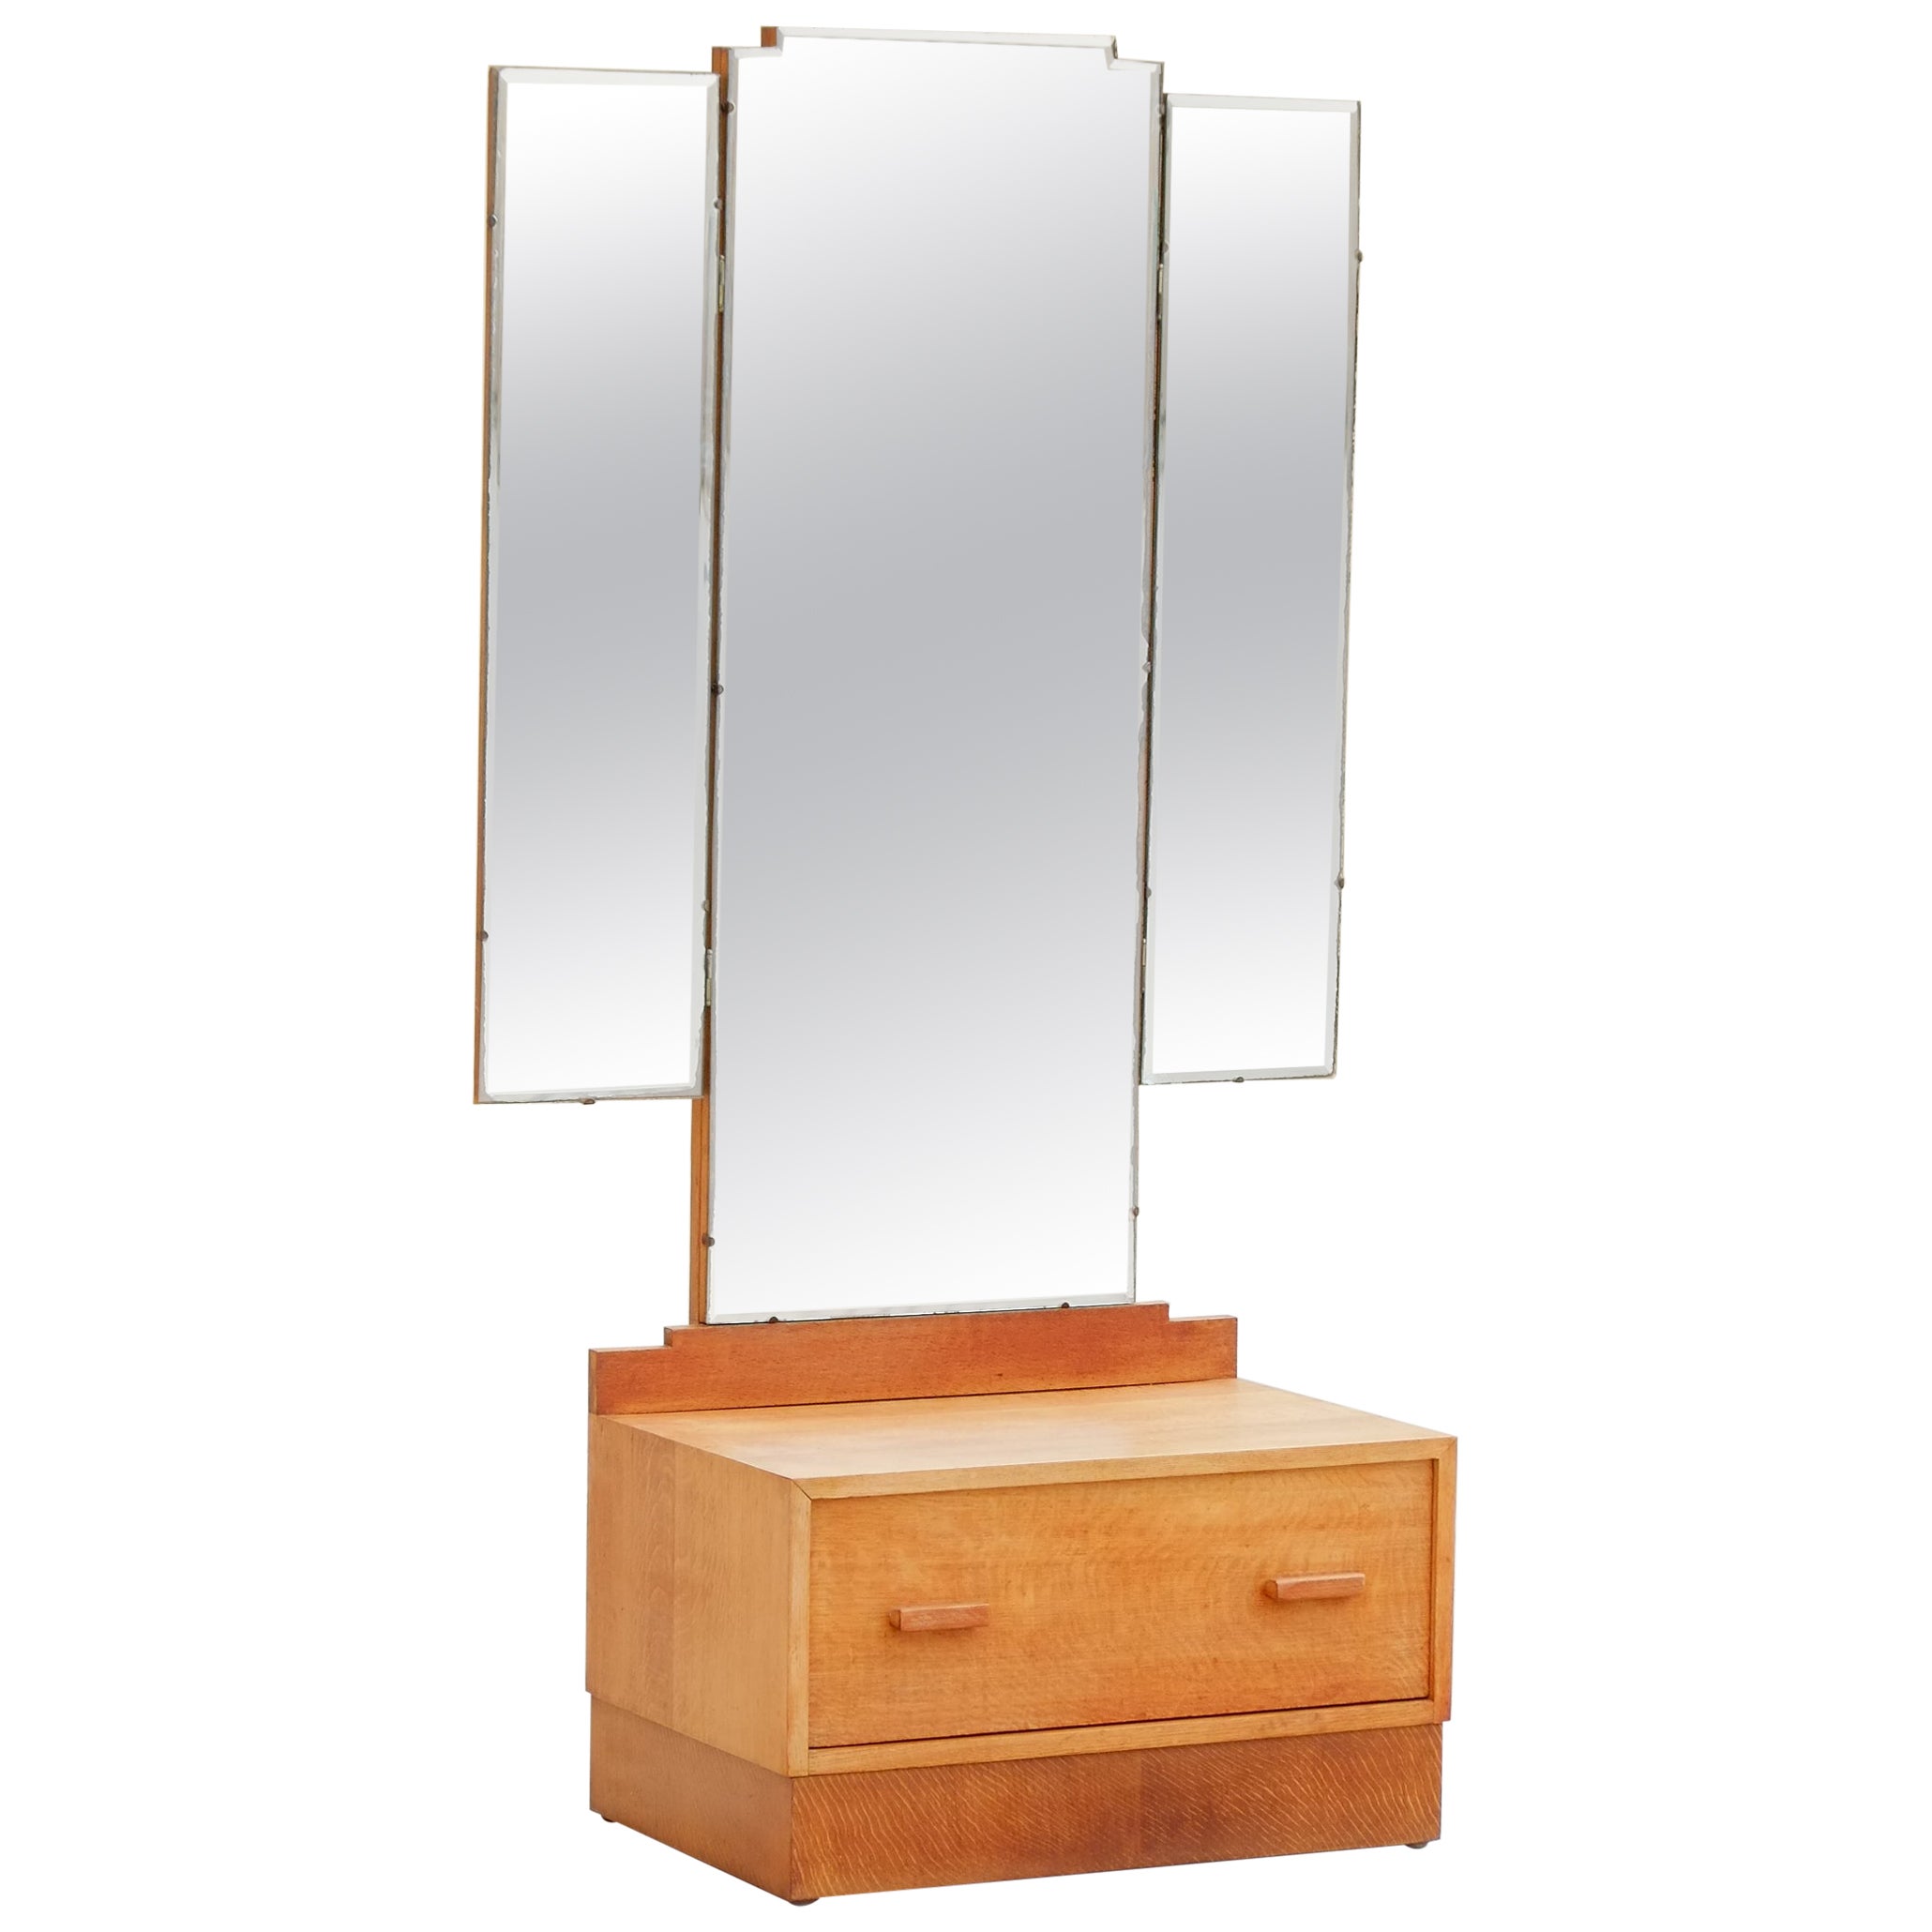 English Art Deco 1930s Solid Oak Triple Dressing Mirror with Drawer For Sale